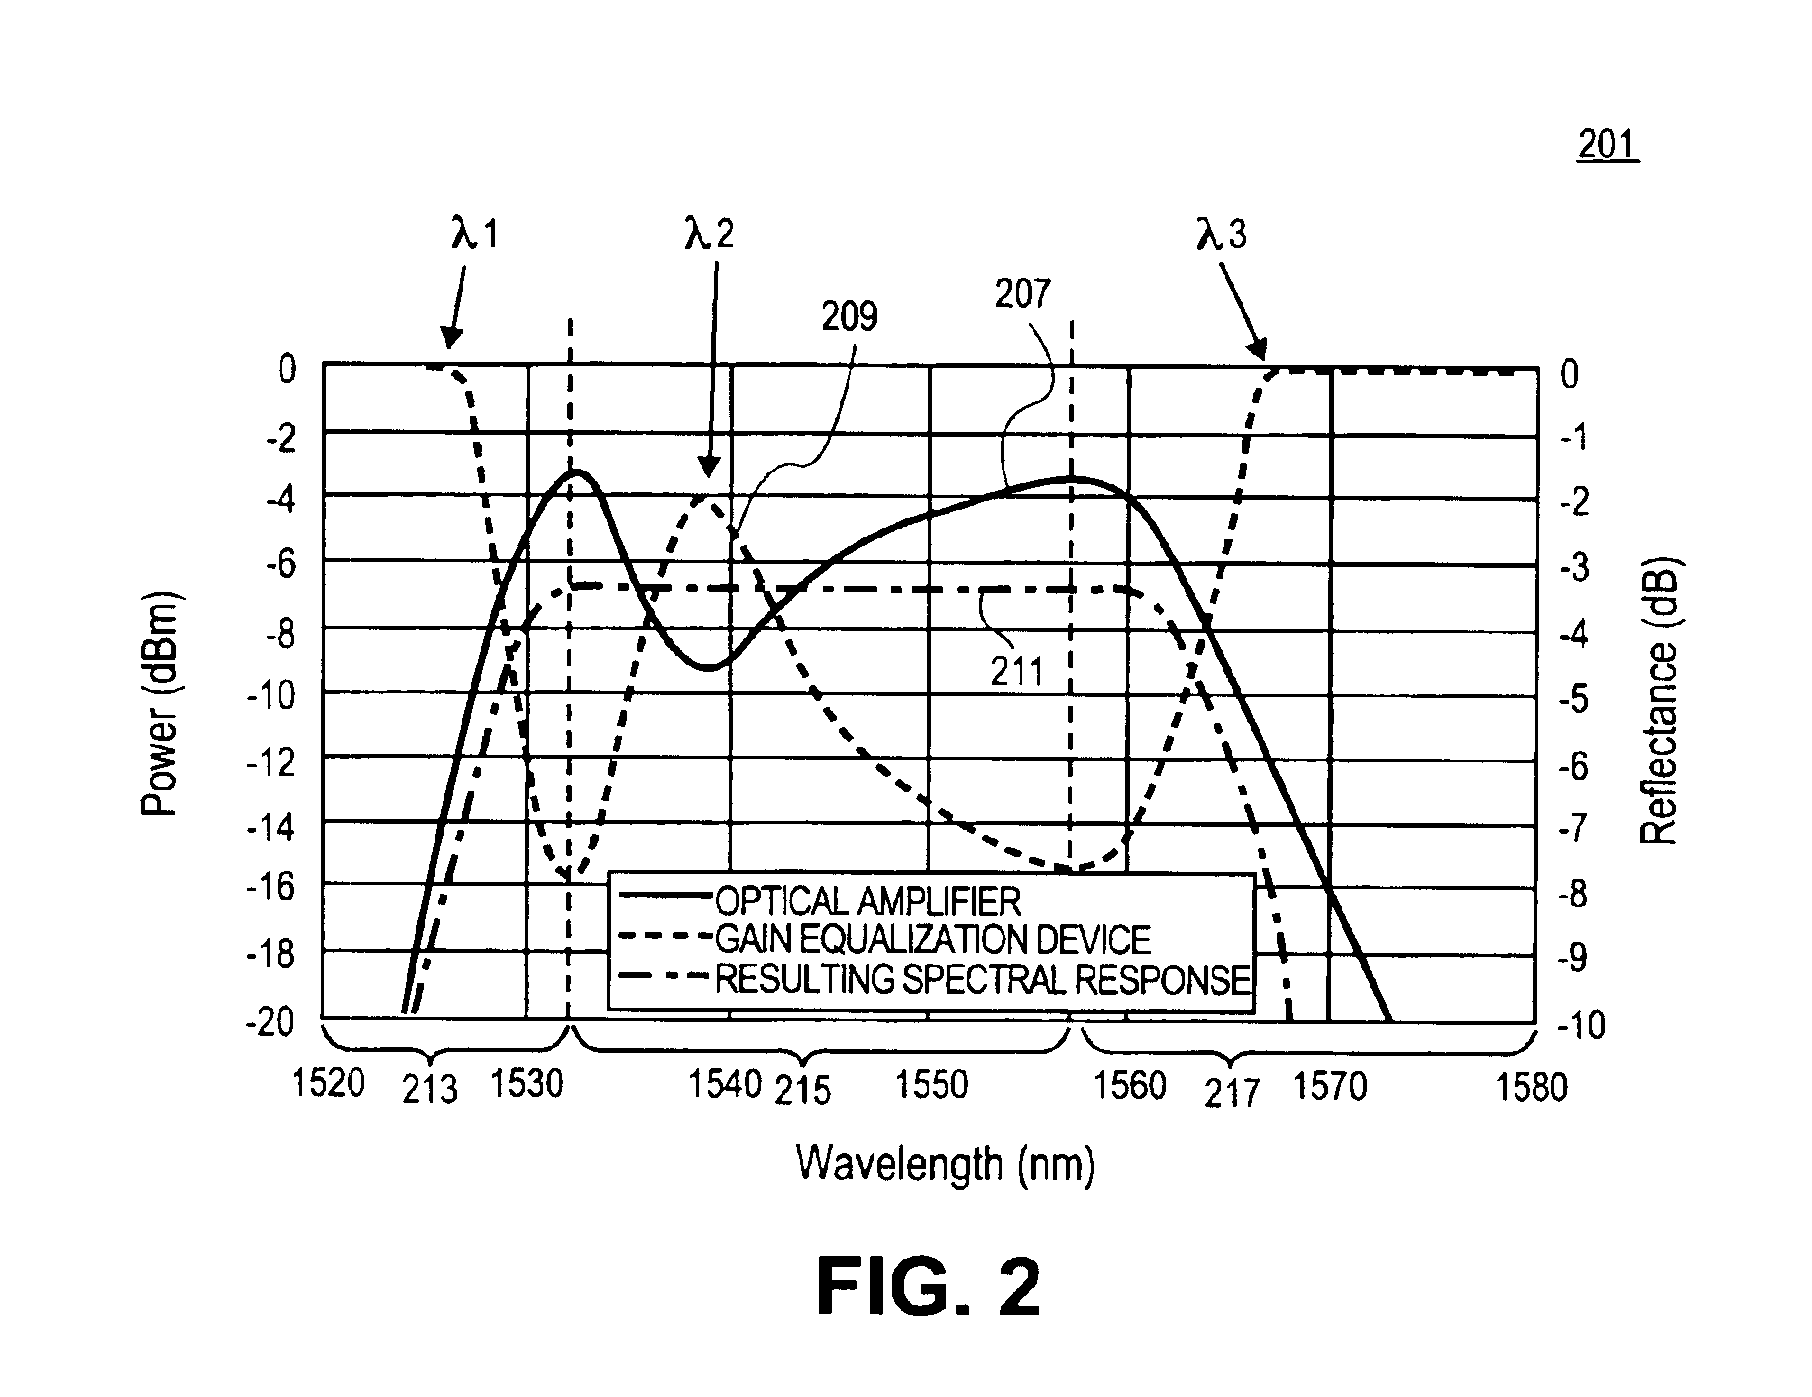 Method and apparatus of a semiconductor-based gain equalization device for optical amplifiers